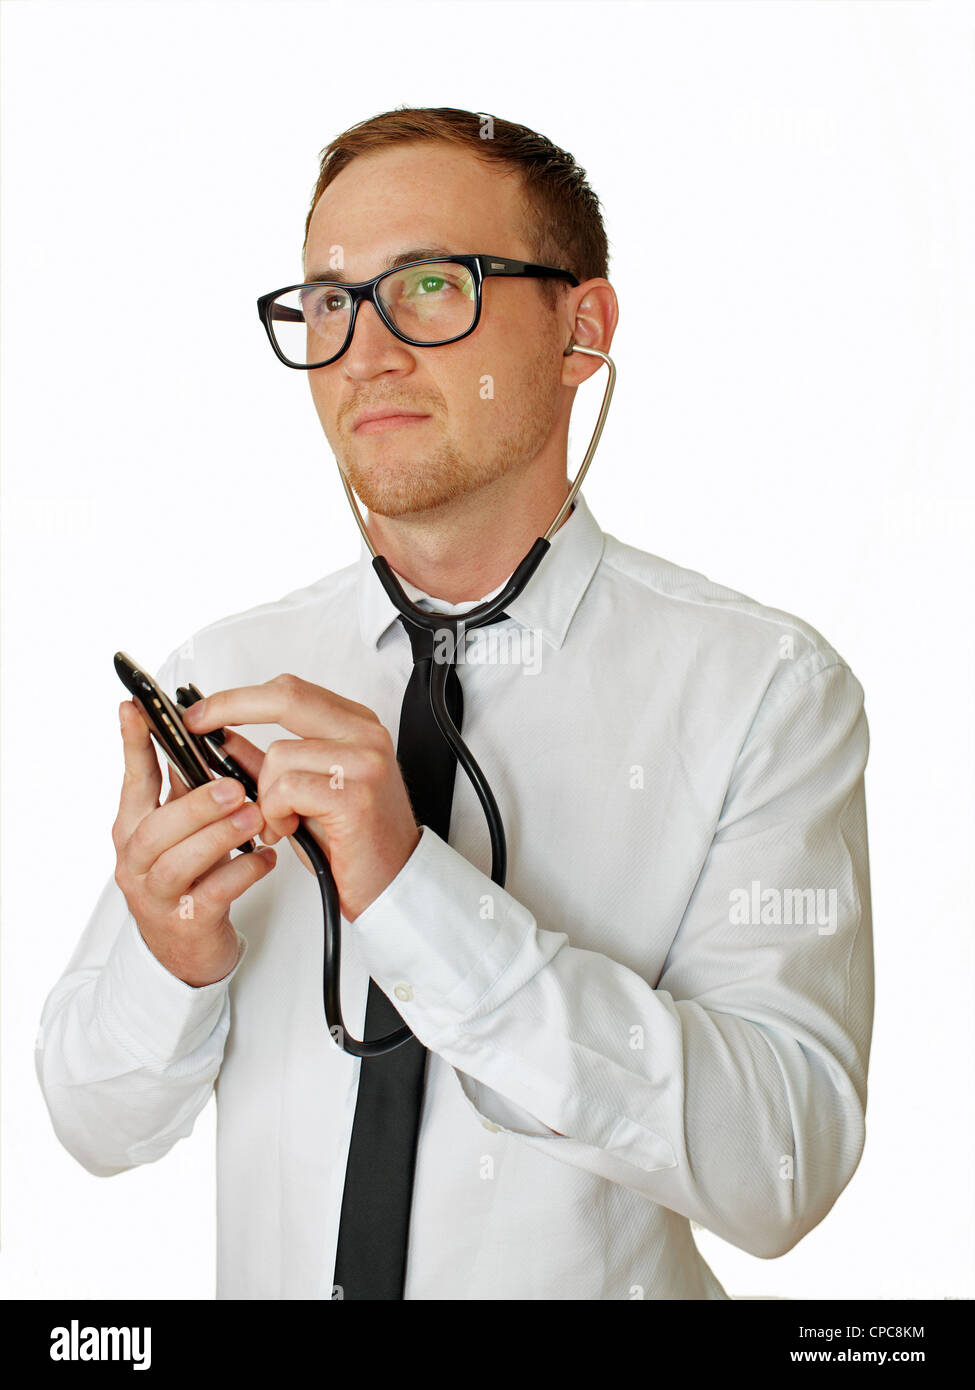 man with broken mobile phone Stock Photo